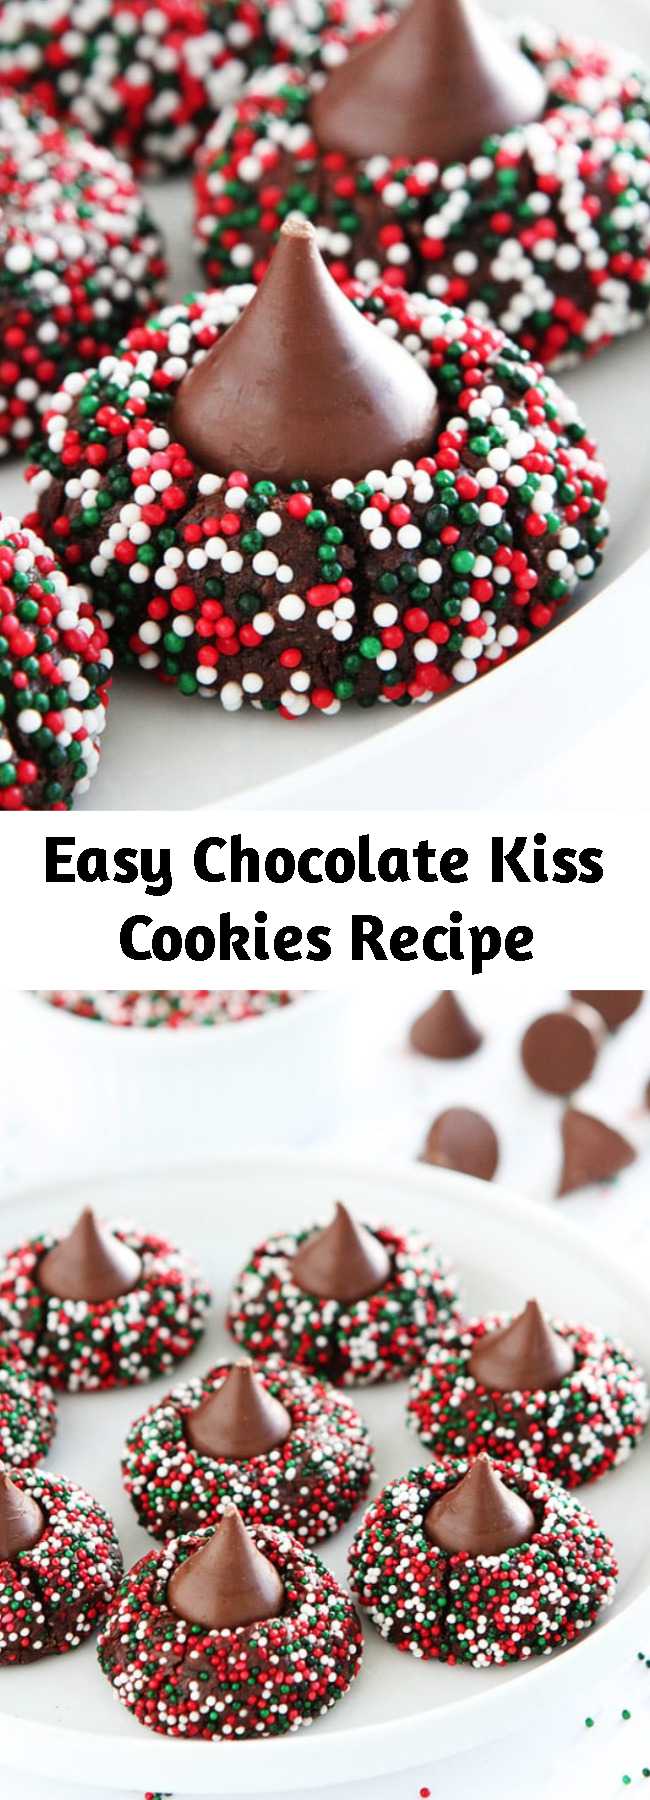 Easy Chocolate Kiss Cookies Recipe - Chocolate Kiss Cookies-decadent chocolate cookies rolled in sprinkles and topped with a chocolate kiss. A fun cookie for the holidays or any day! You can use any flavored kisses too as center toppings for this amazing cookie.